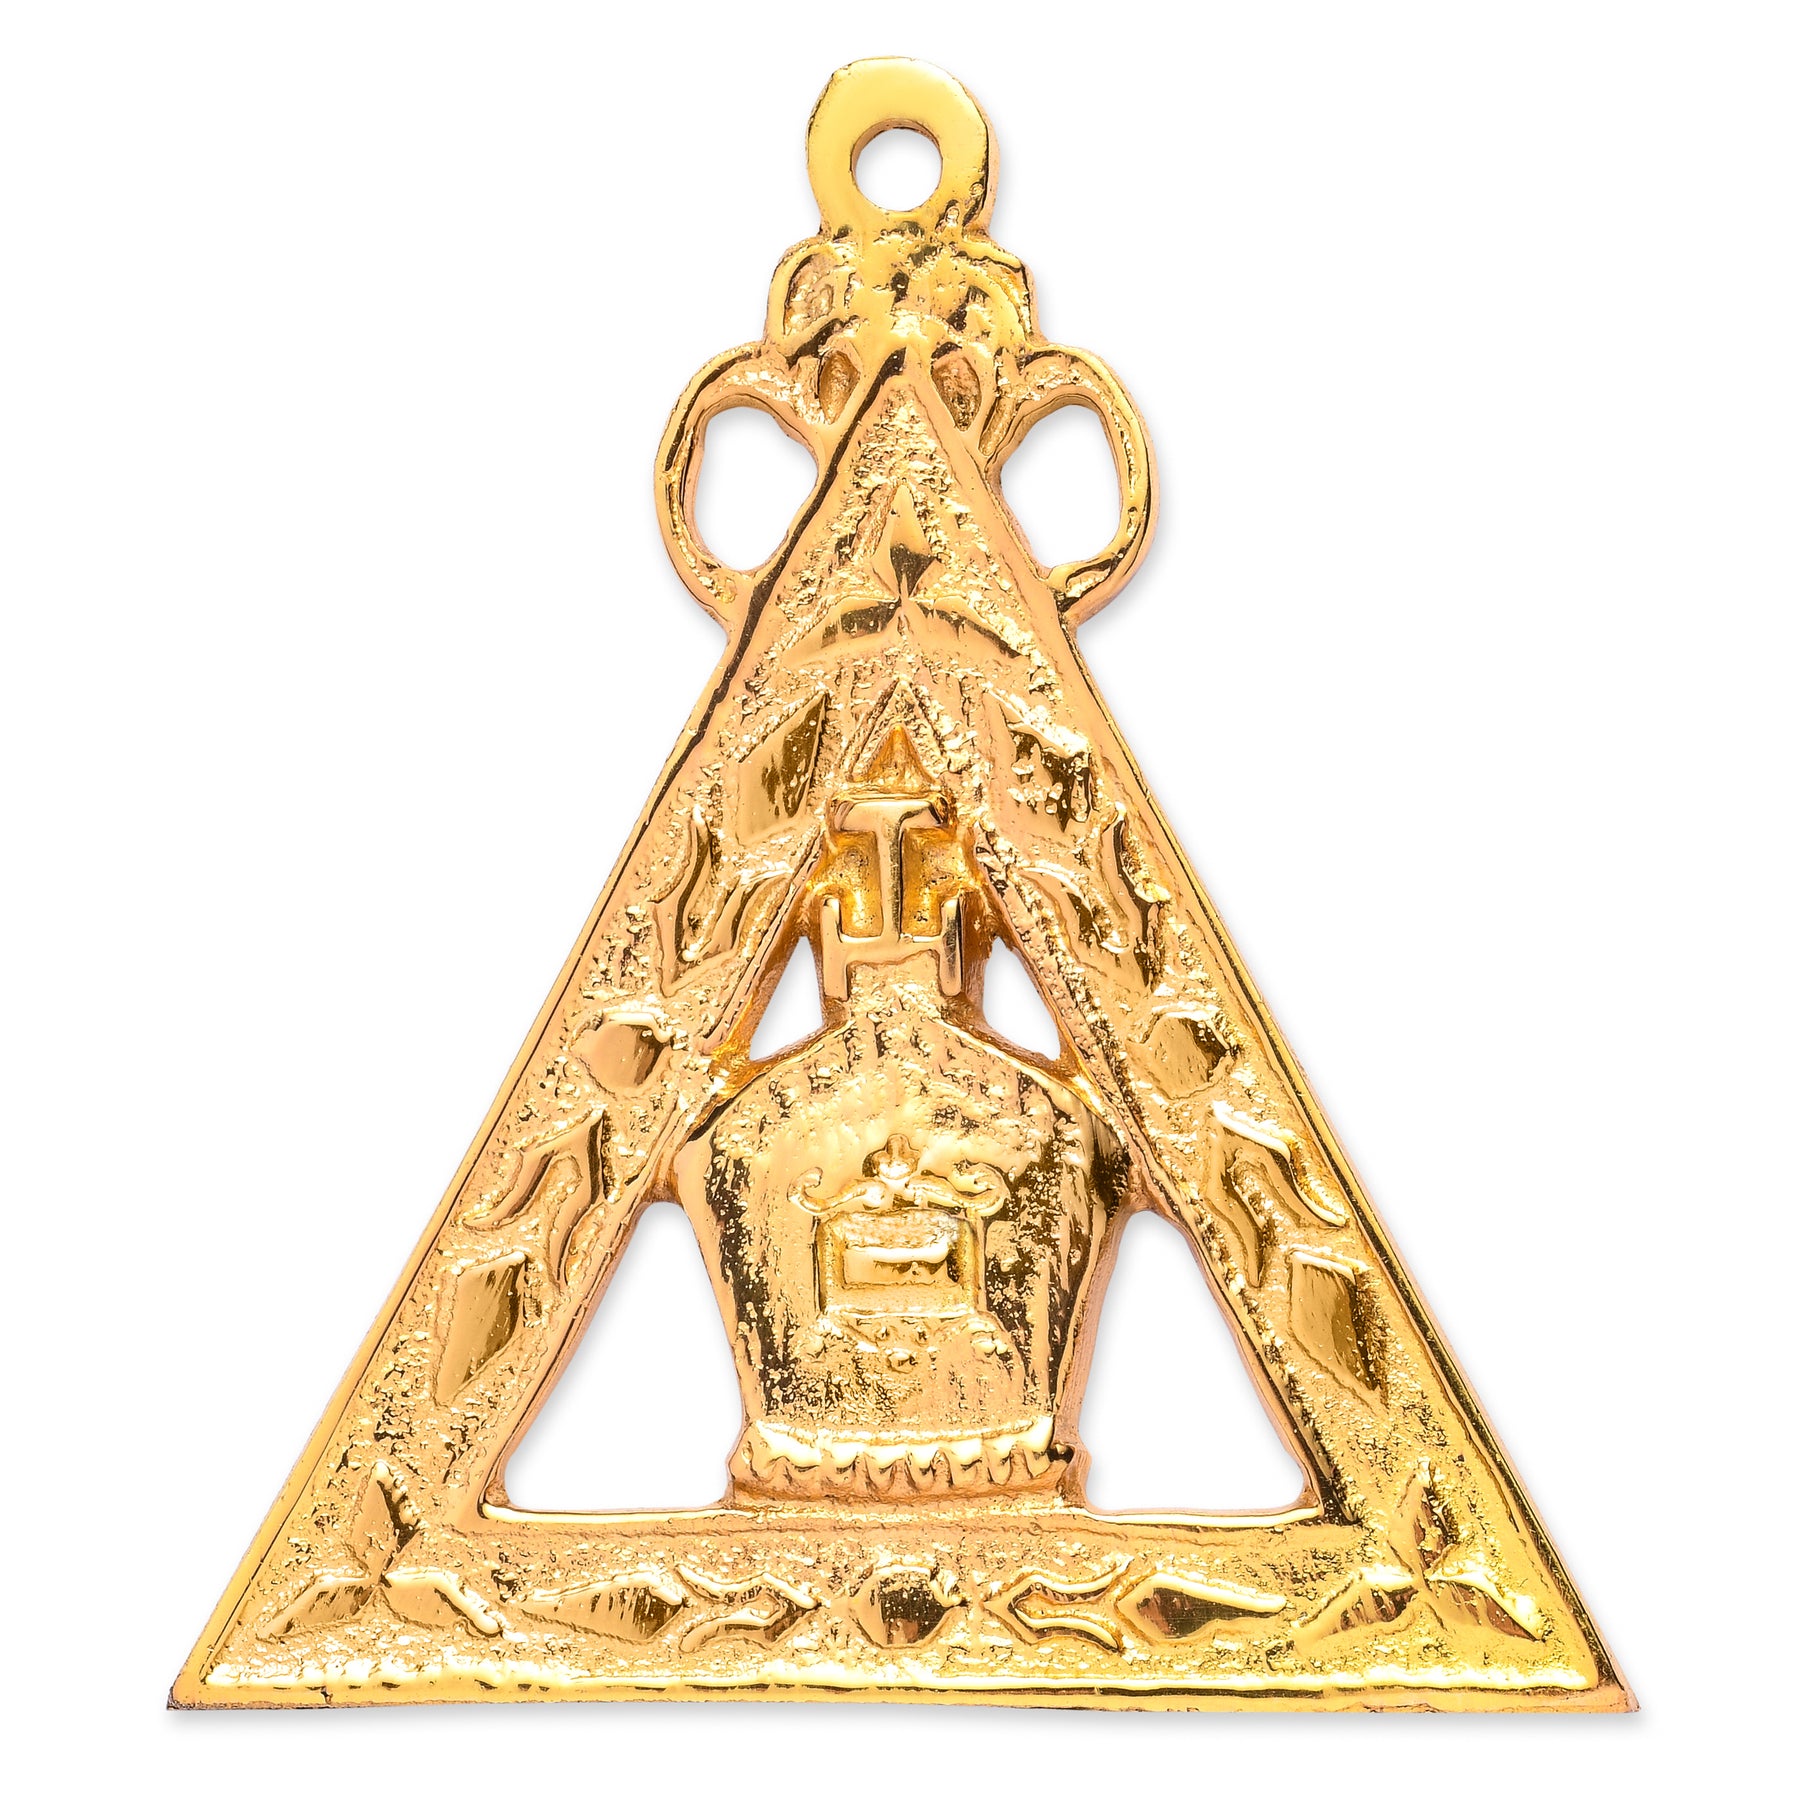 Hight Priest Royal Arch Chapter Officer Collar Jewel - Gold Plated - Bricks Masons